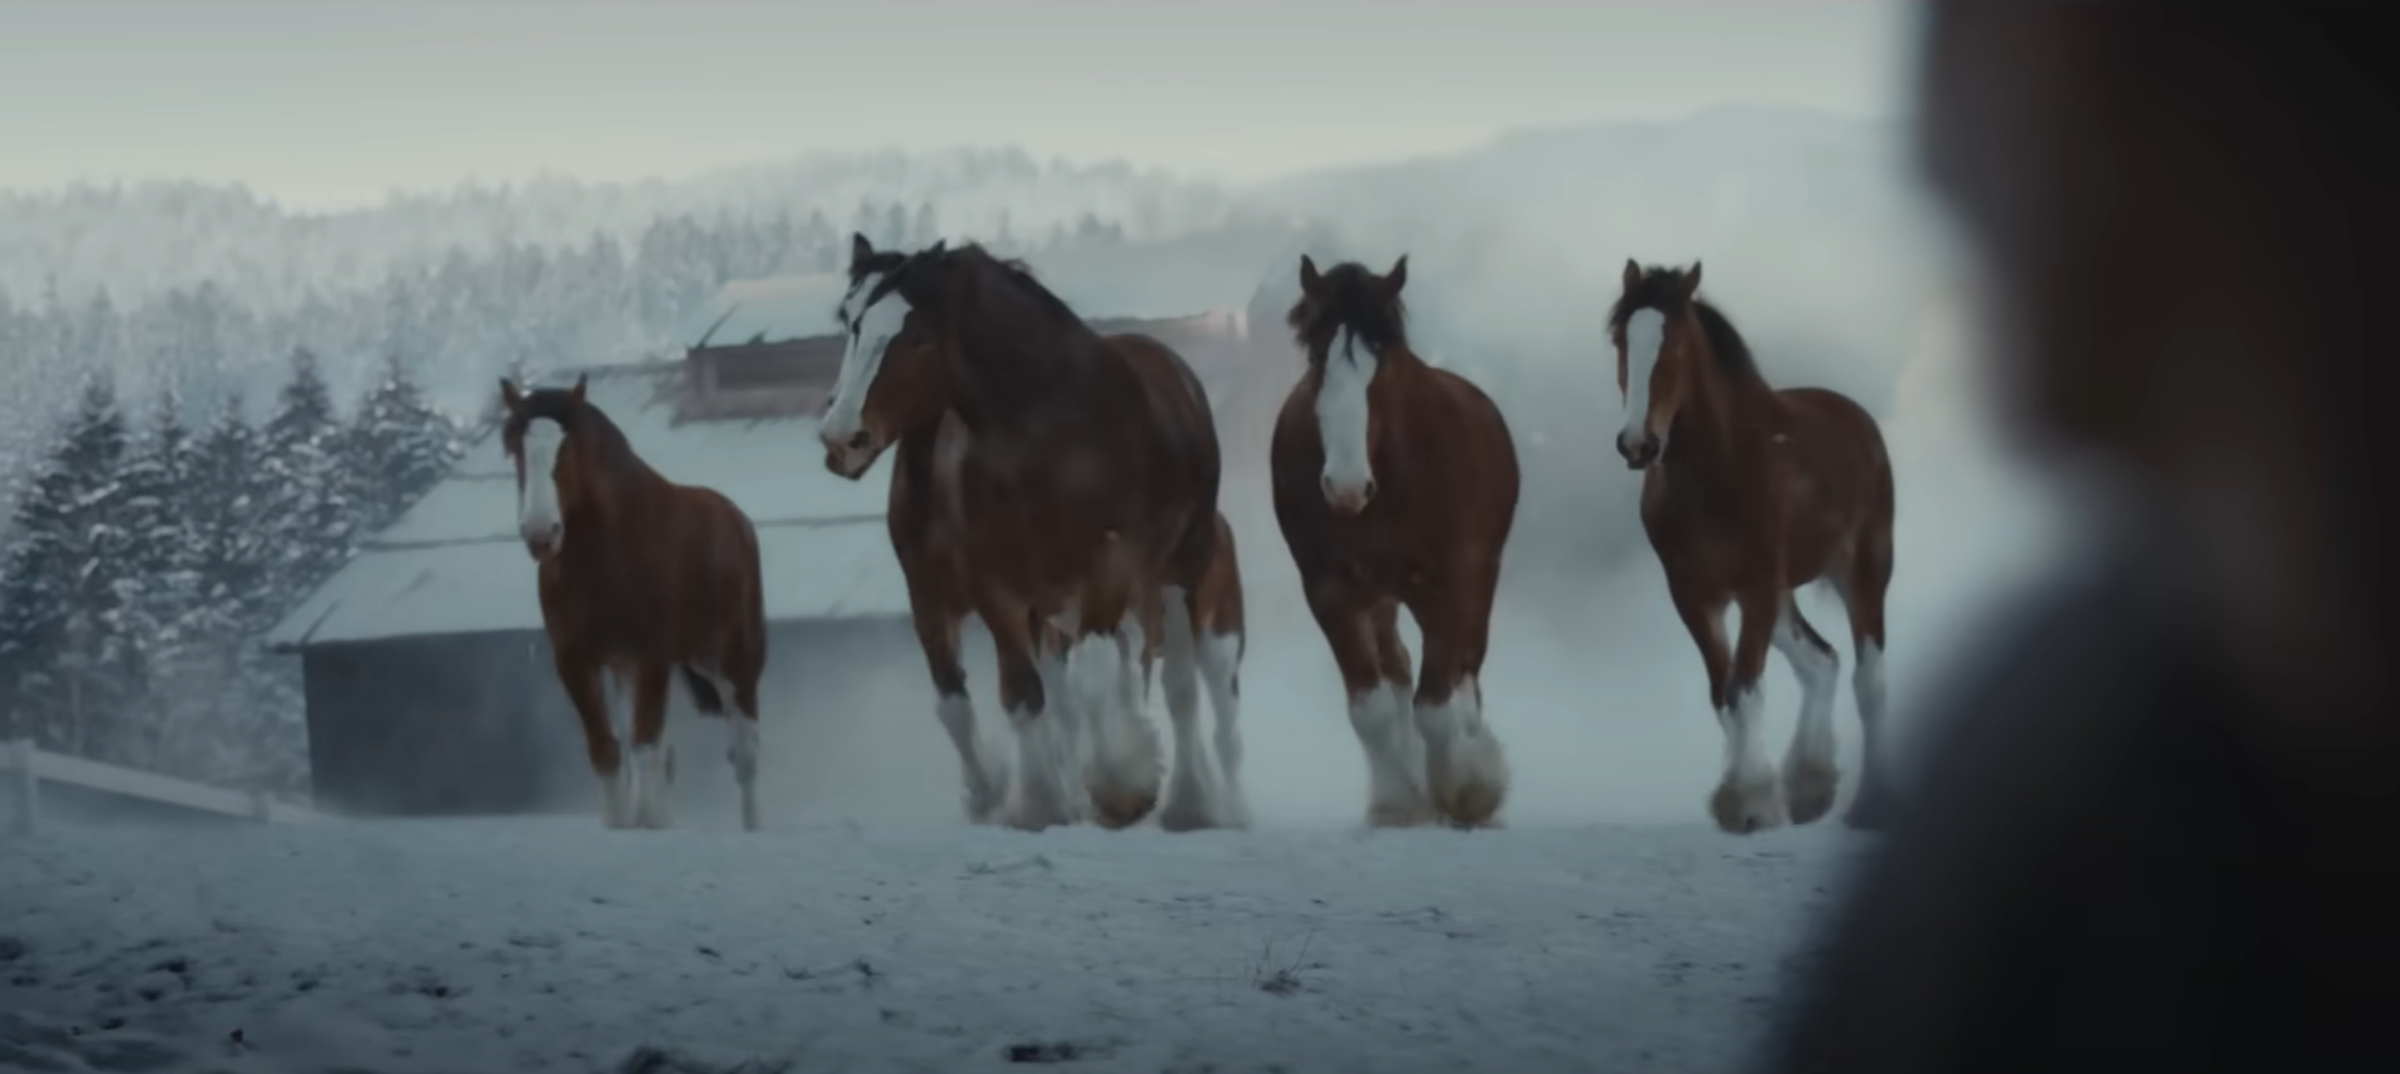 Sneak Peak: Super Bowl LVIII The Clydesdales Are Back